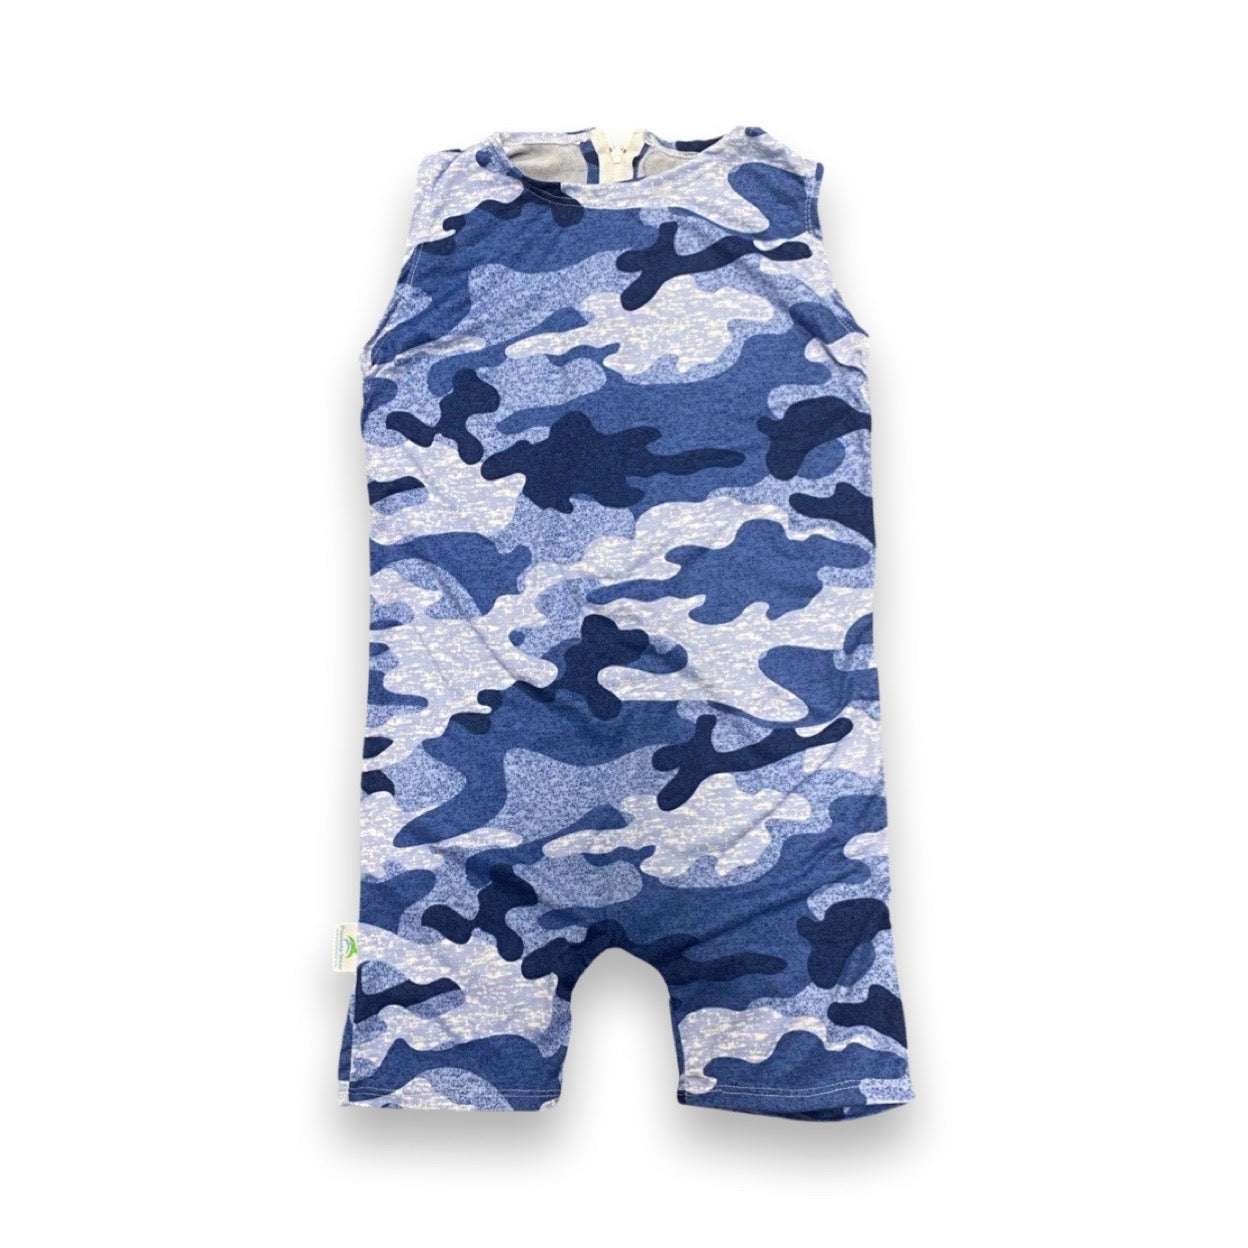 A blue camouflage print baby romper with a zip back bodysuit